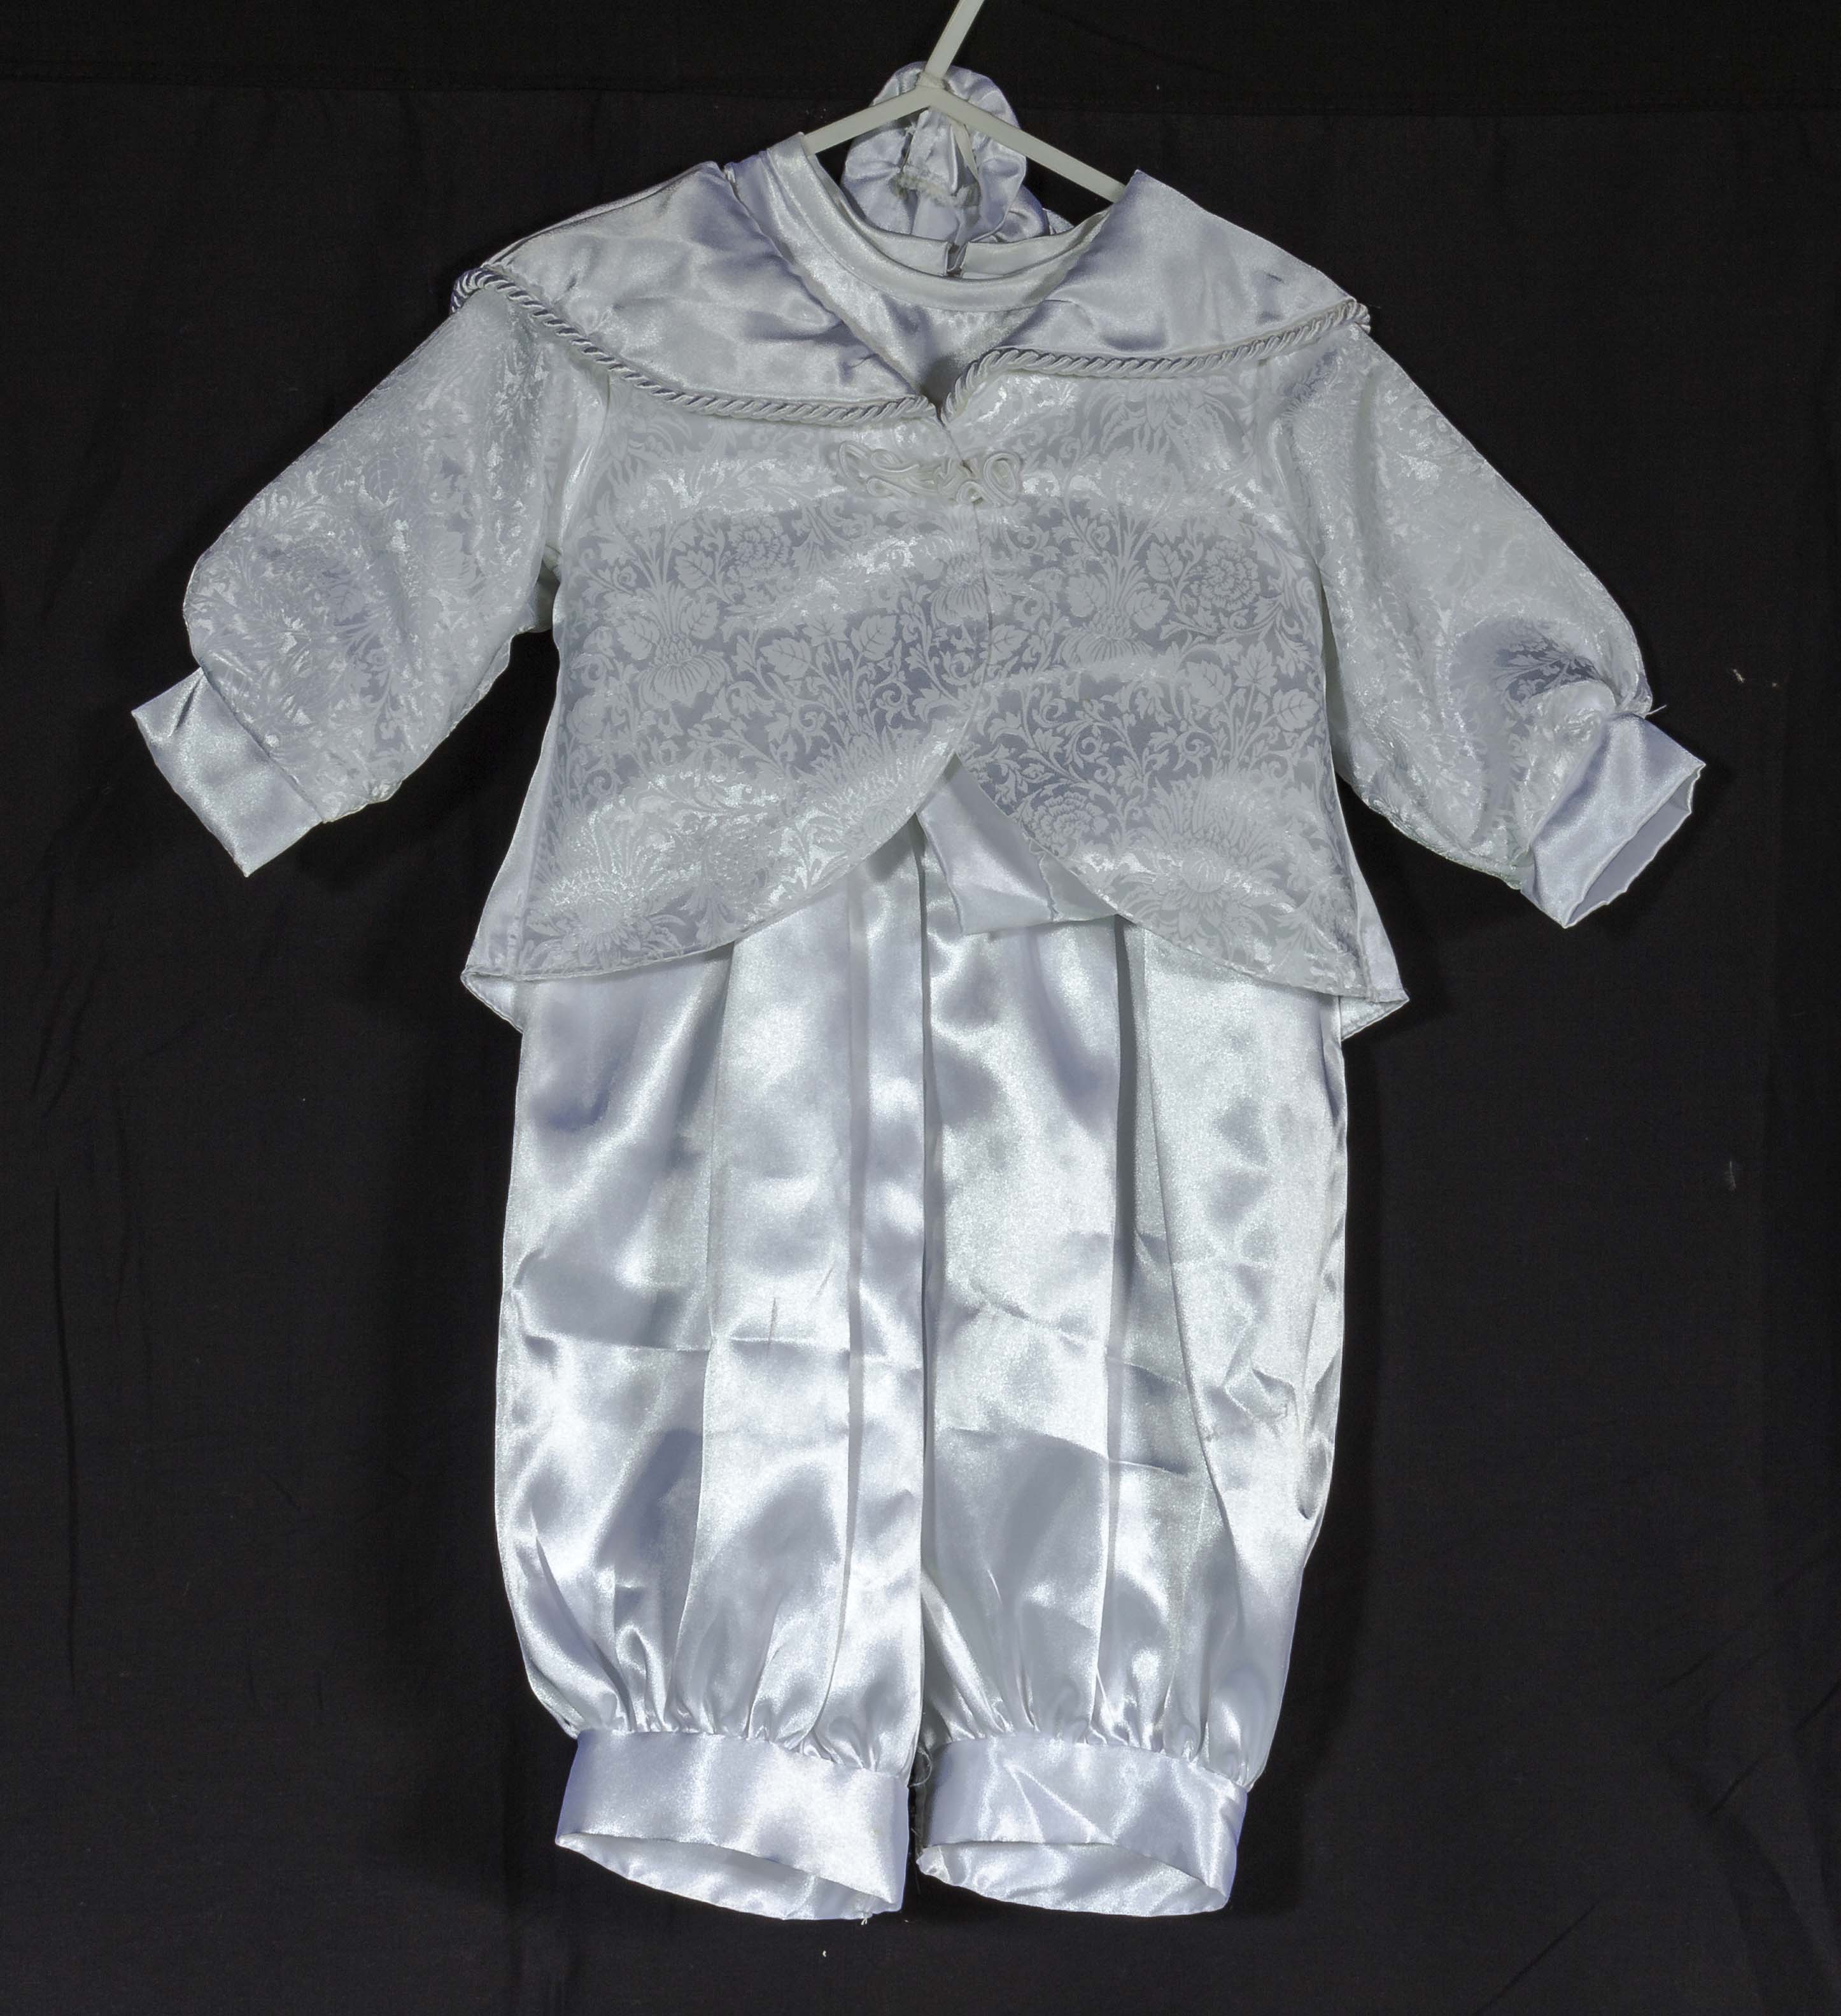 A baby's christening suit